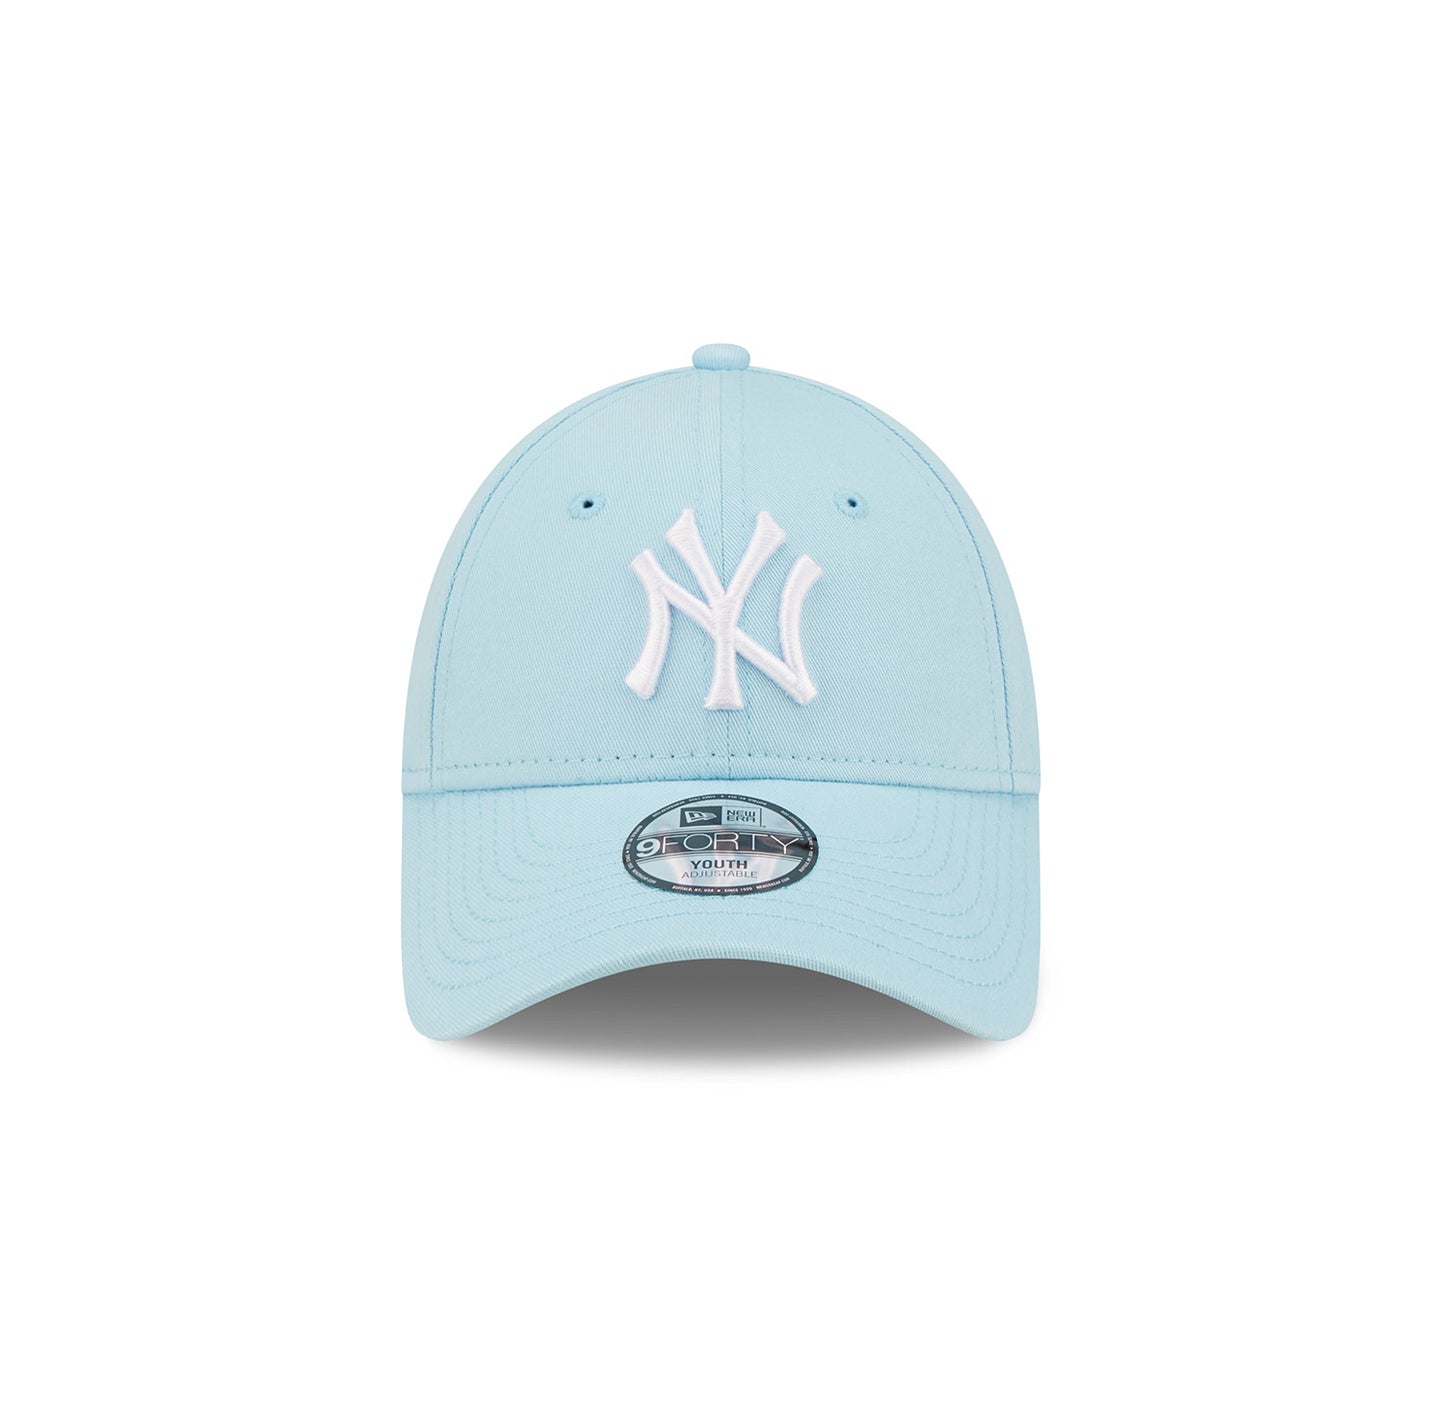 New York Yankees New Era 9FORTY YOUTH Strap back Cap sky